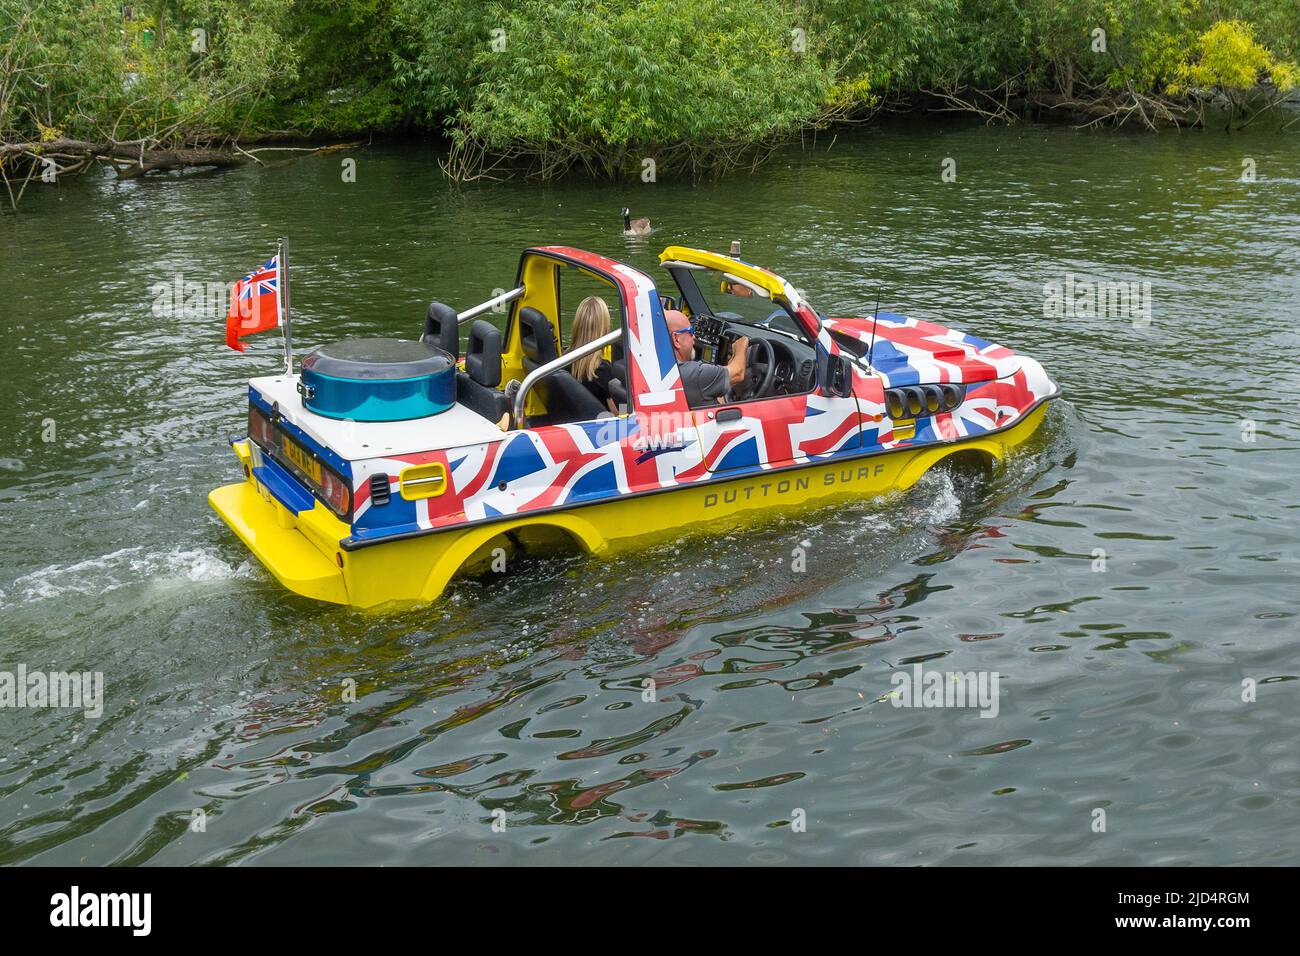 Amphibious car on River Thames, decorated for Queen's 70th (Platinum) Jubilee Stock Photo